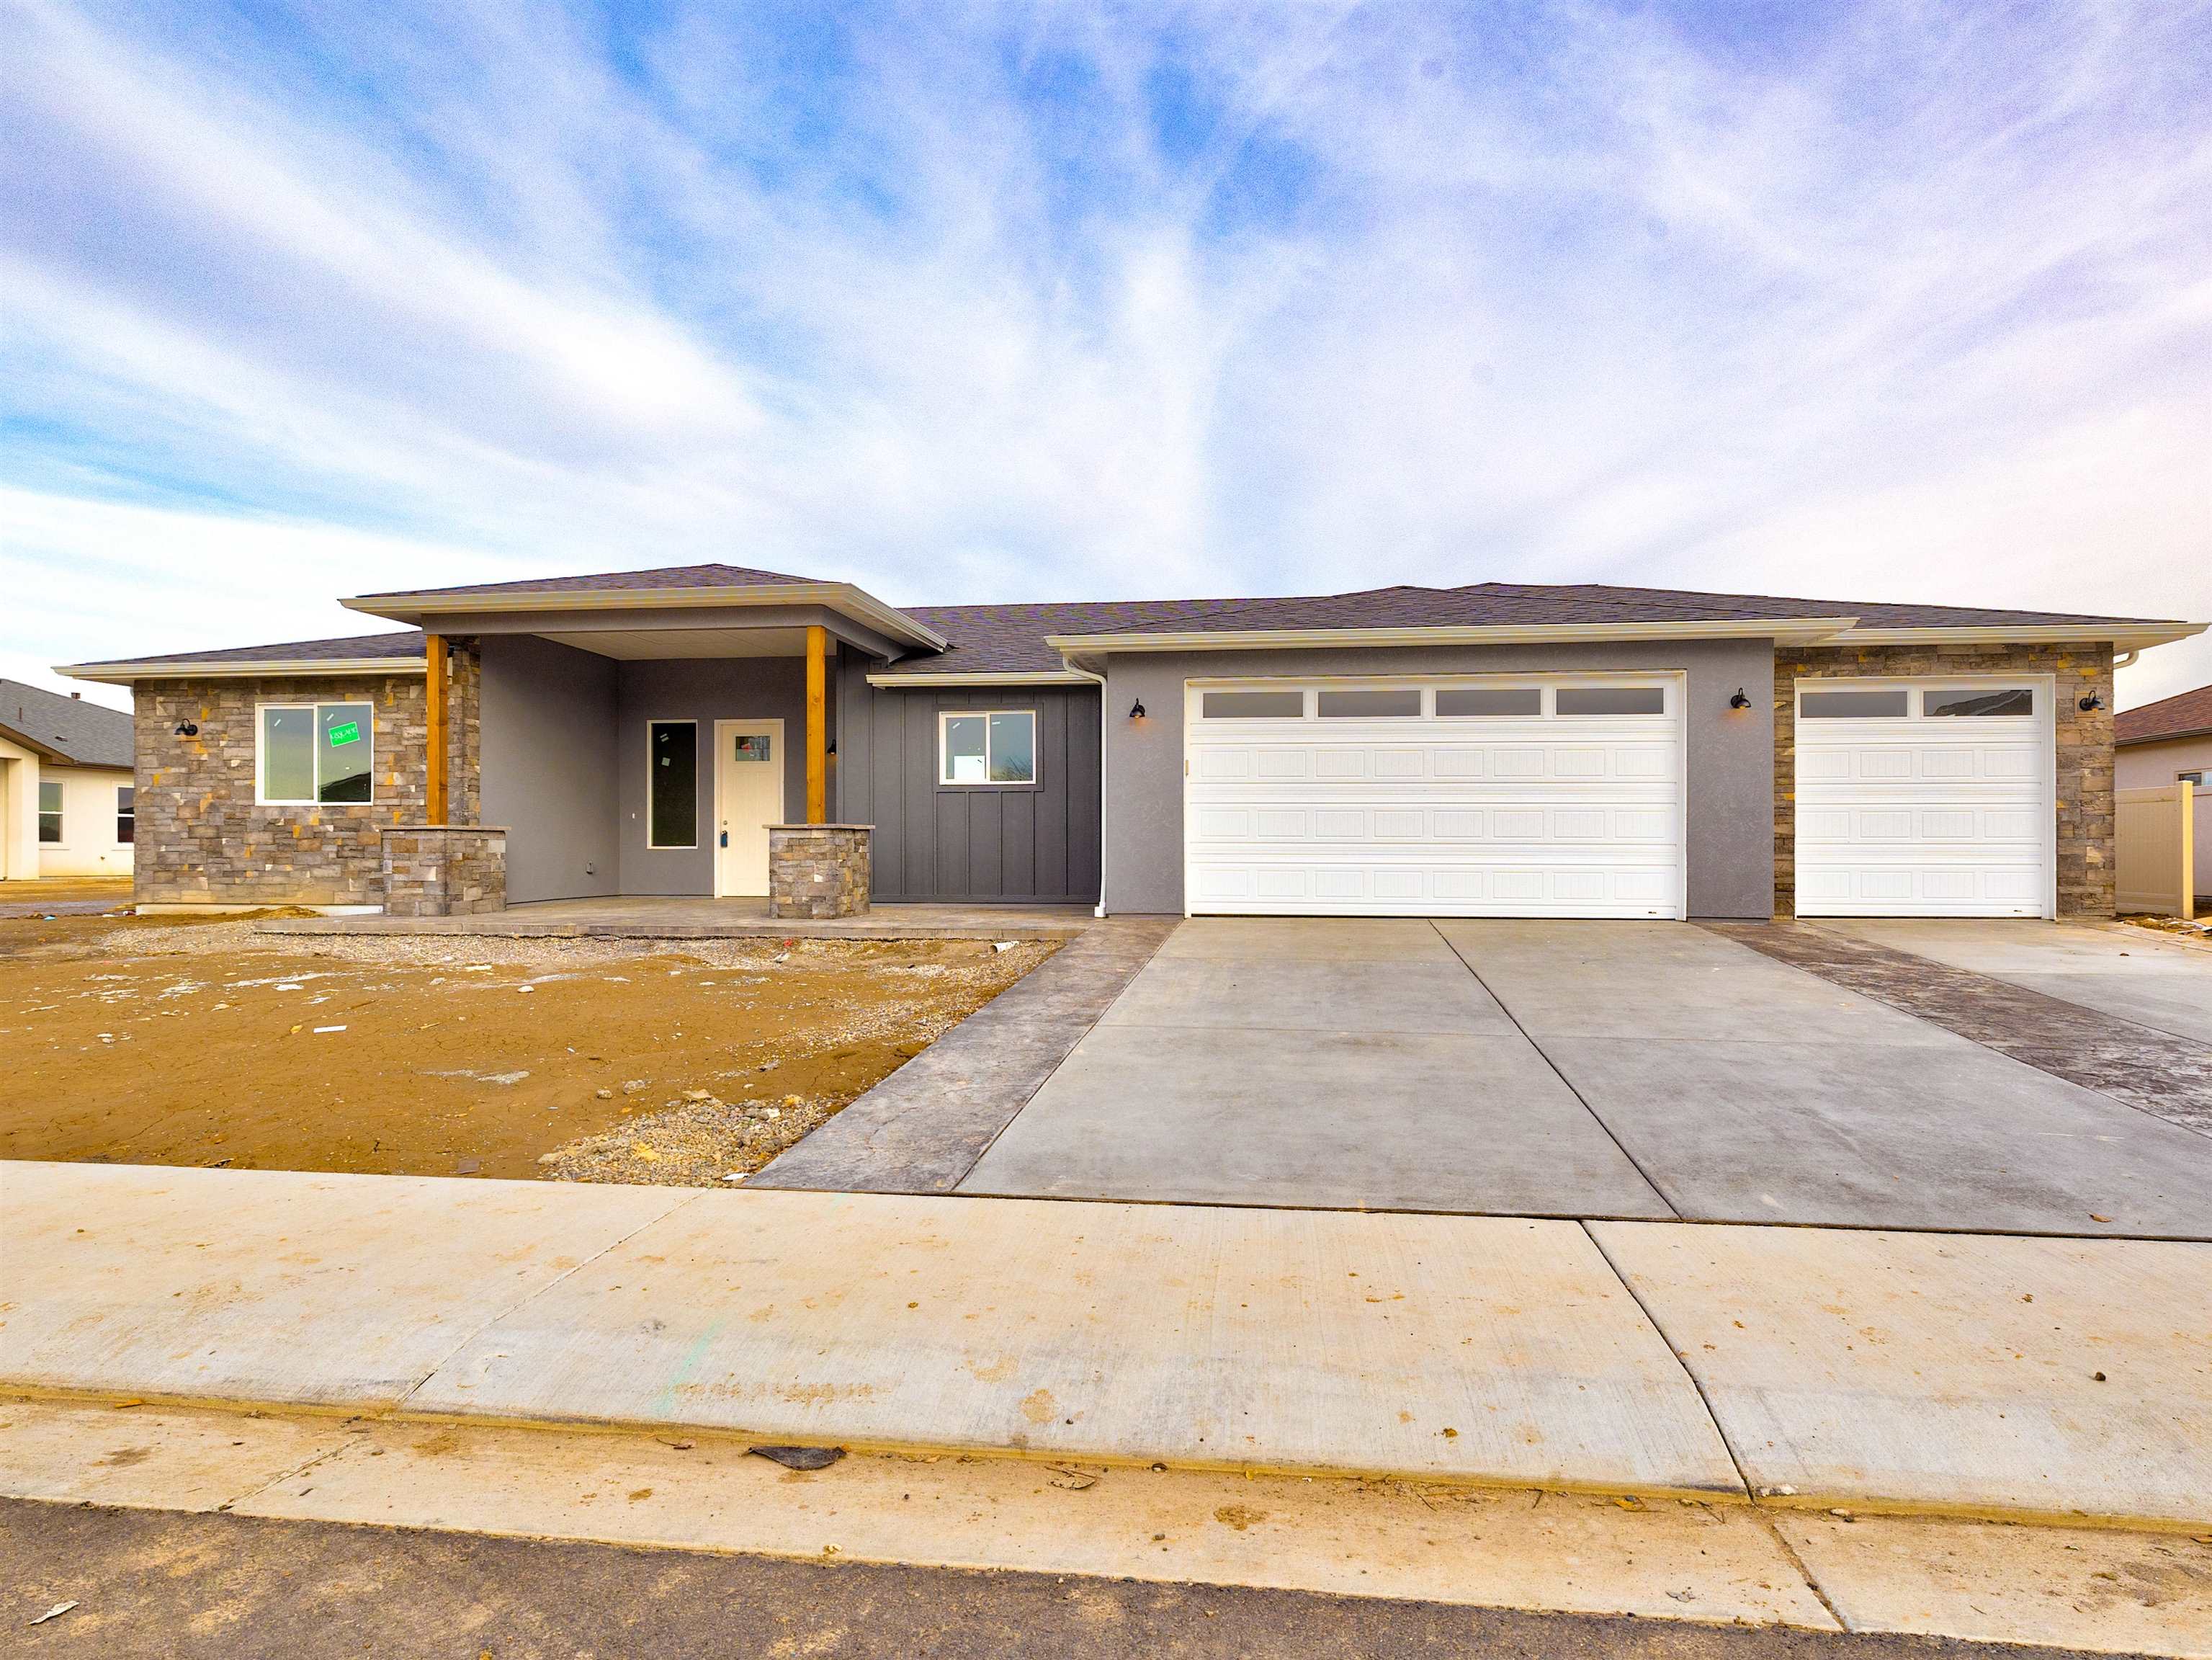 This stunning new build is a MUST SEE! Located in the Orchard Ridge subdivision just minutes from downtown Fruita. This home was planned and constructed with precise plans to create a dynamic, and comforting feel throughout the home. Some features include beautiful granite in the kitchen and bathrooms, a stunning electric fireplace in the living room, designated office space with a closet, and toe kick lighting in the bathrooms. The primary bedroom has a retreat feel and you will appreciate the spilt bedroom floor plan. Outdoor features include stamped concrete on porch and patio and is used in landscaping. Plenty of room for RV parking.